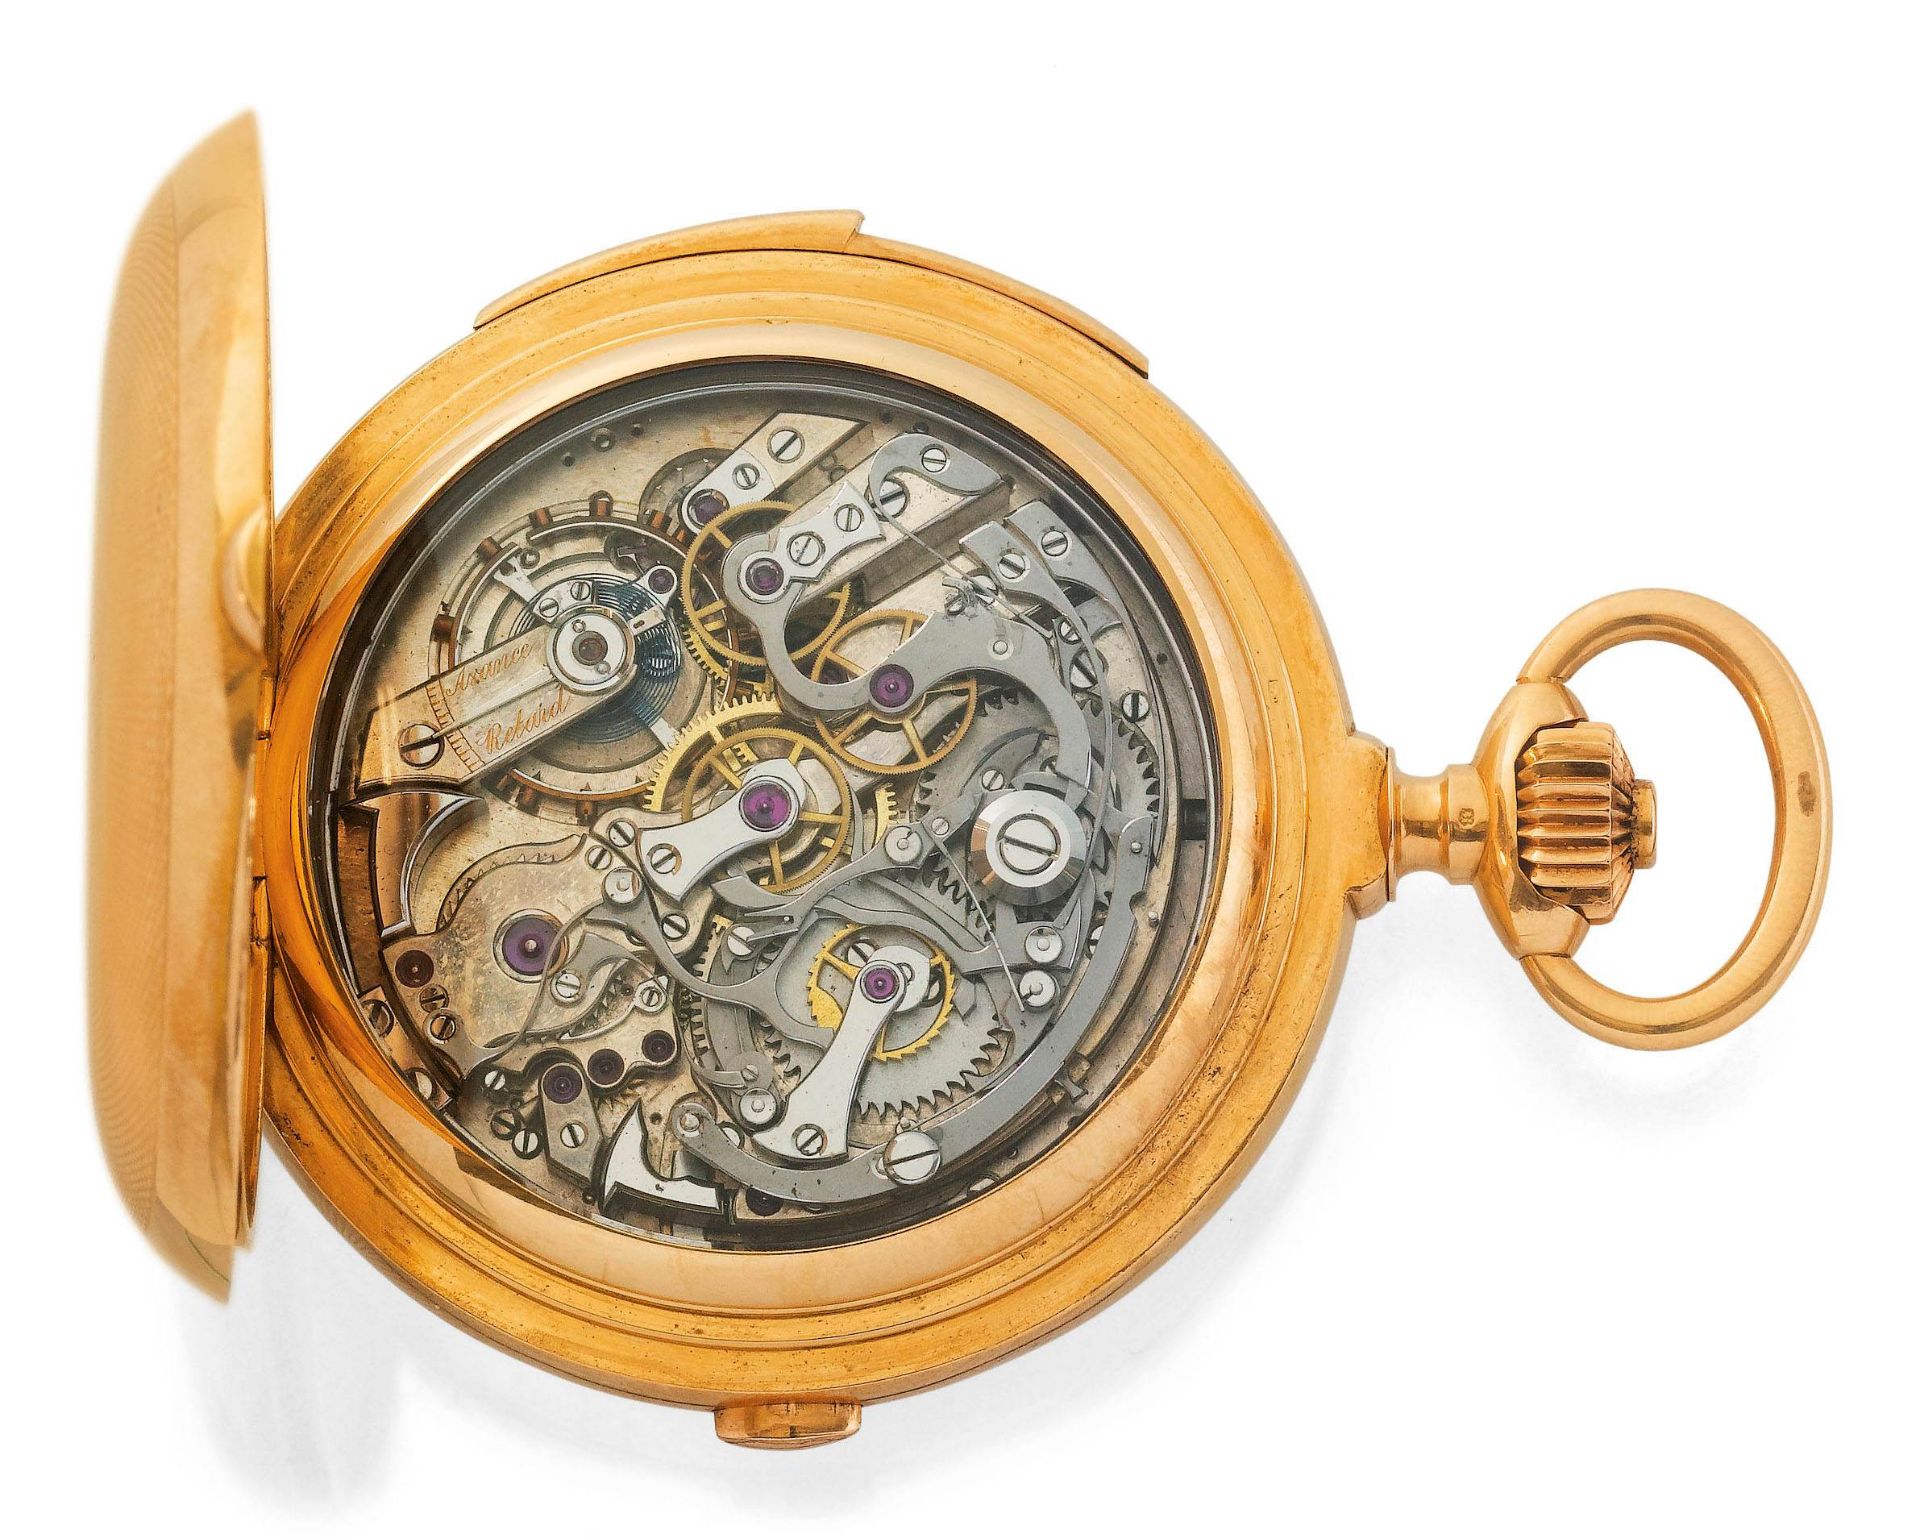 F. Audemars, heavy, rare minute repeater with chronograph, ca. 1900. - Image 2 of 6